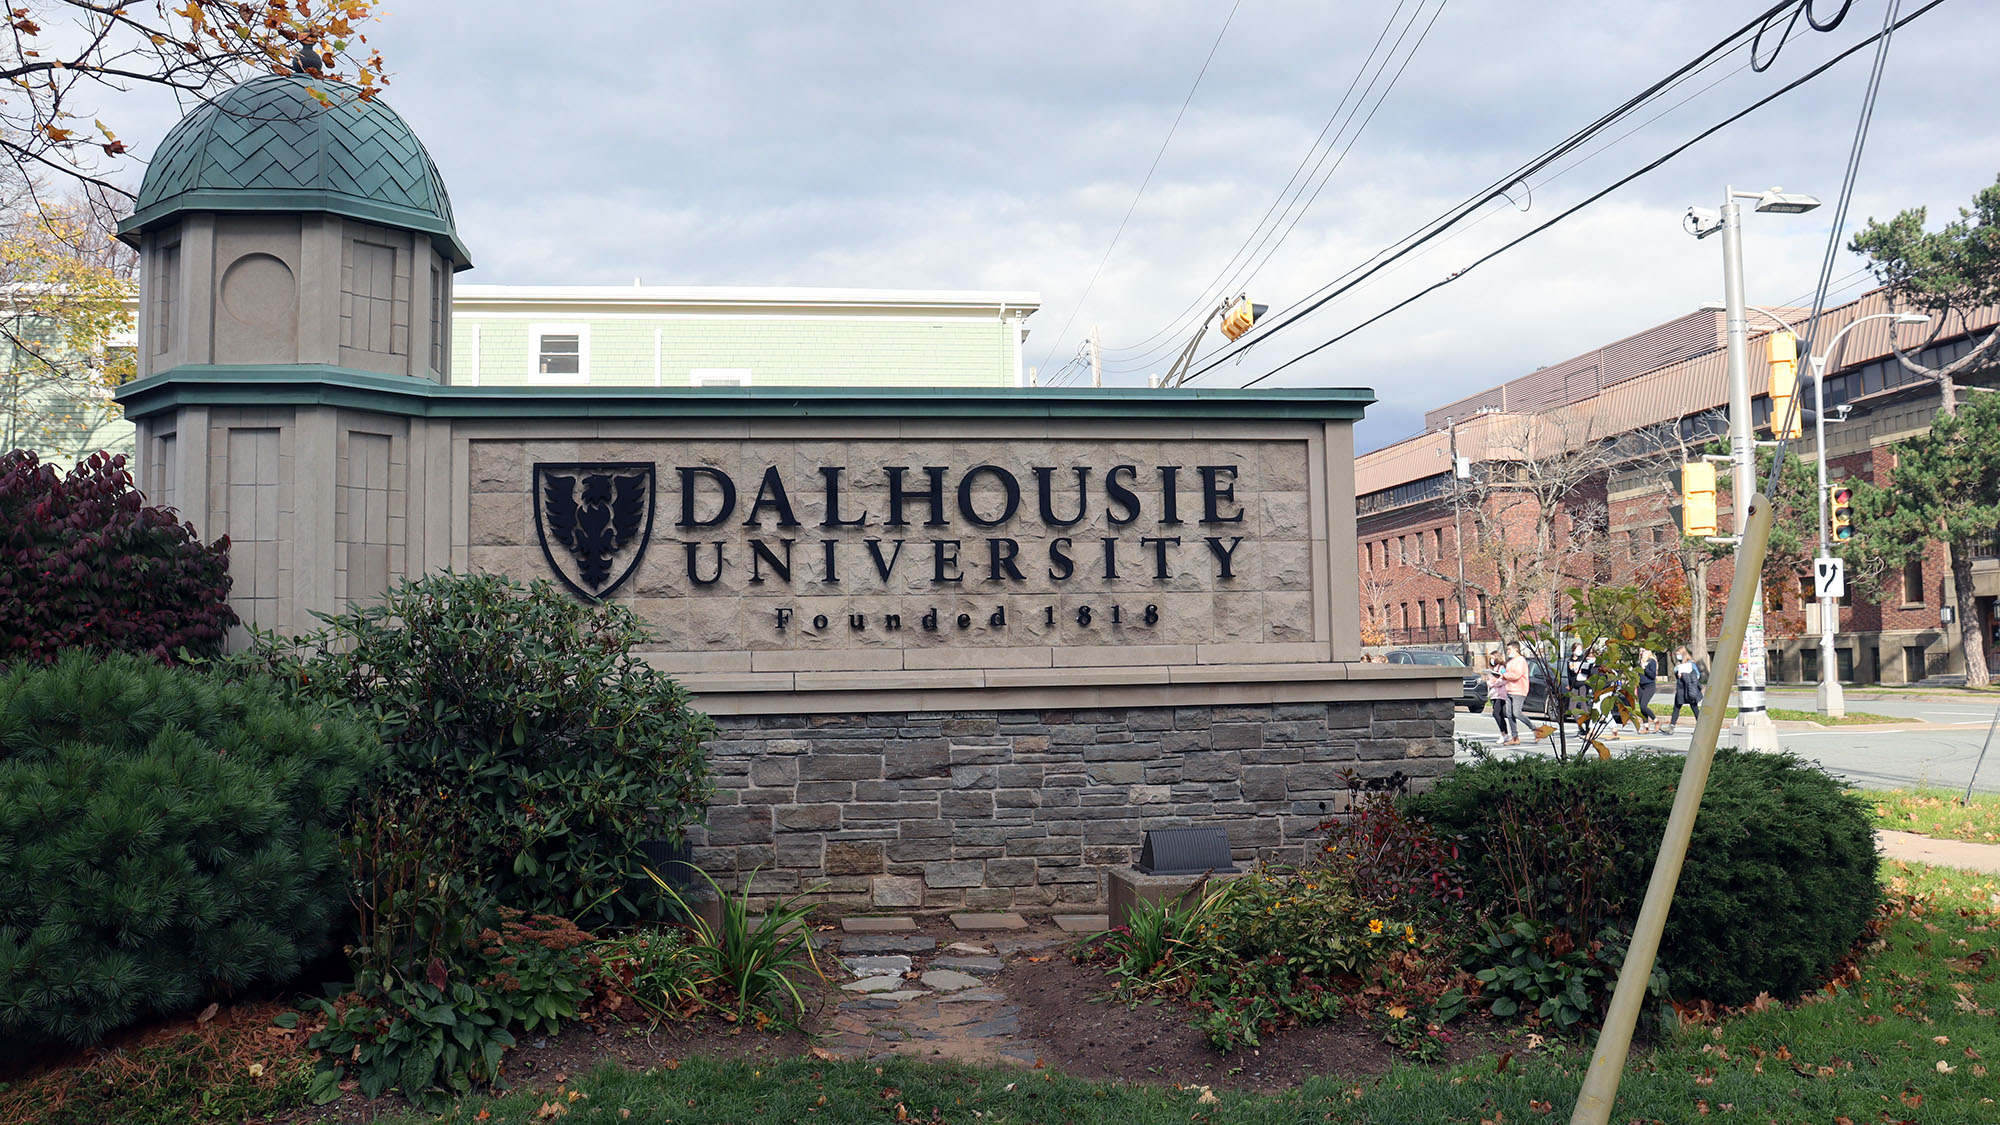 Members of CUPE 3912 at Dalhousie University will go back to work on Nov. 14.